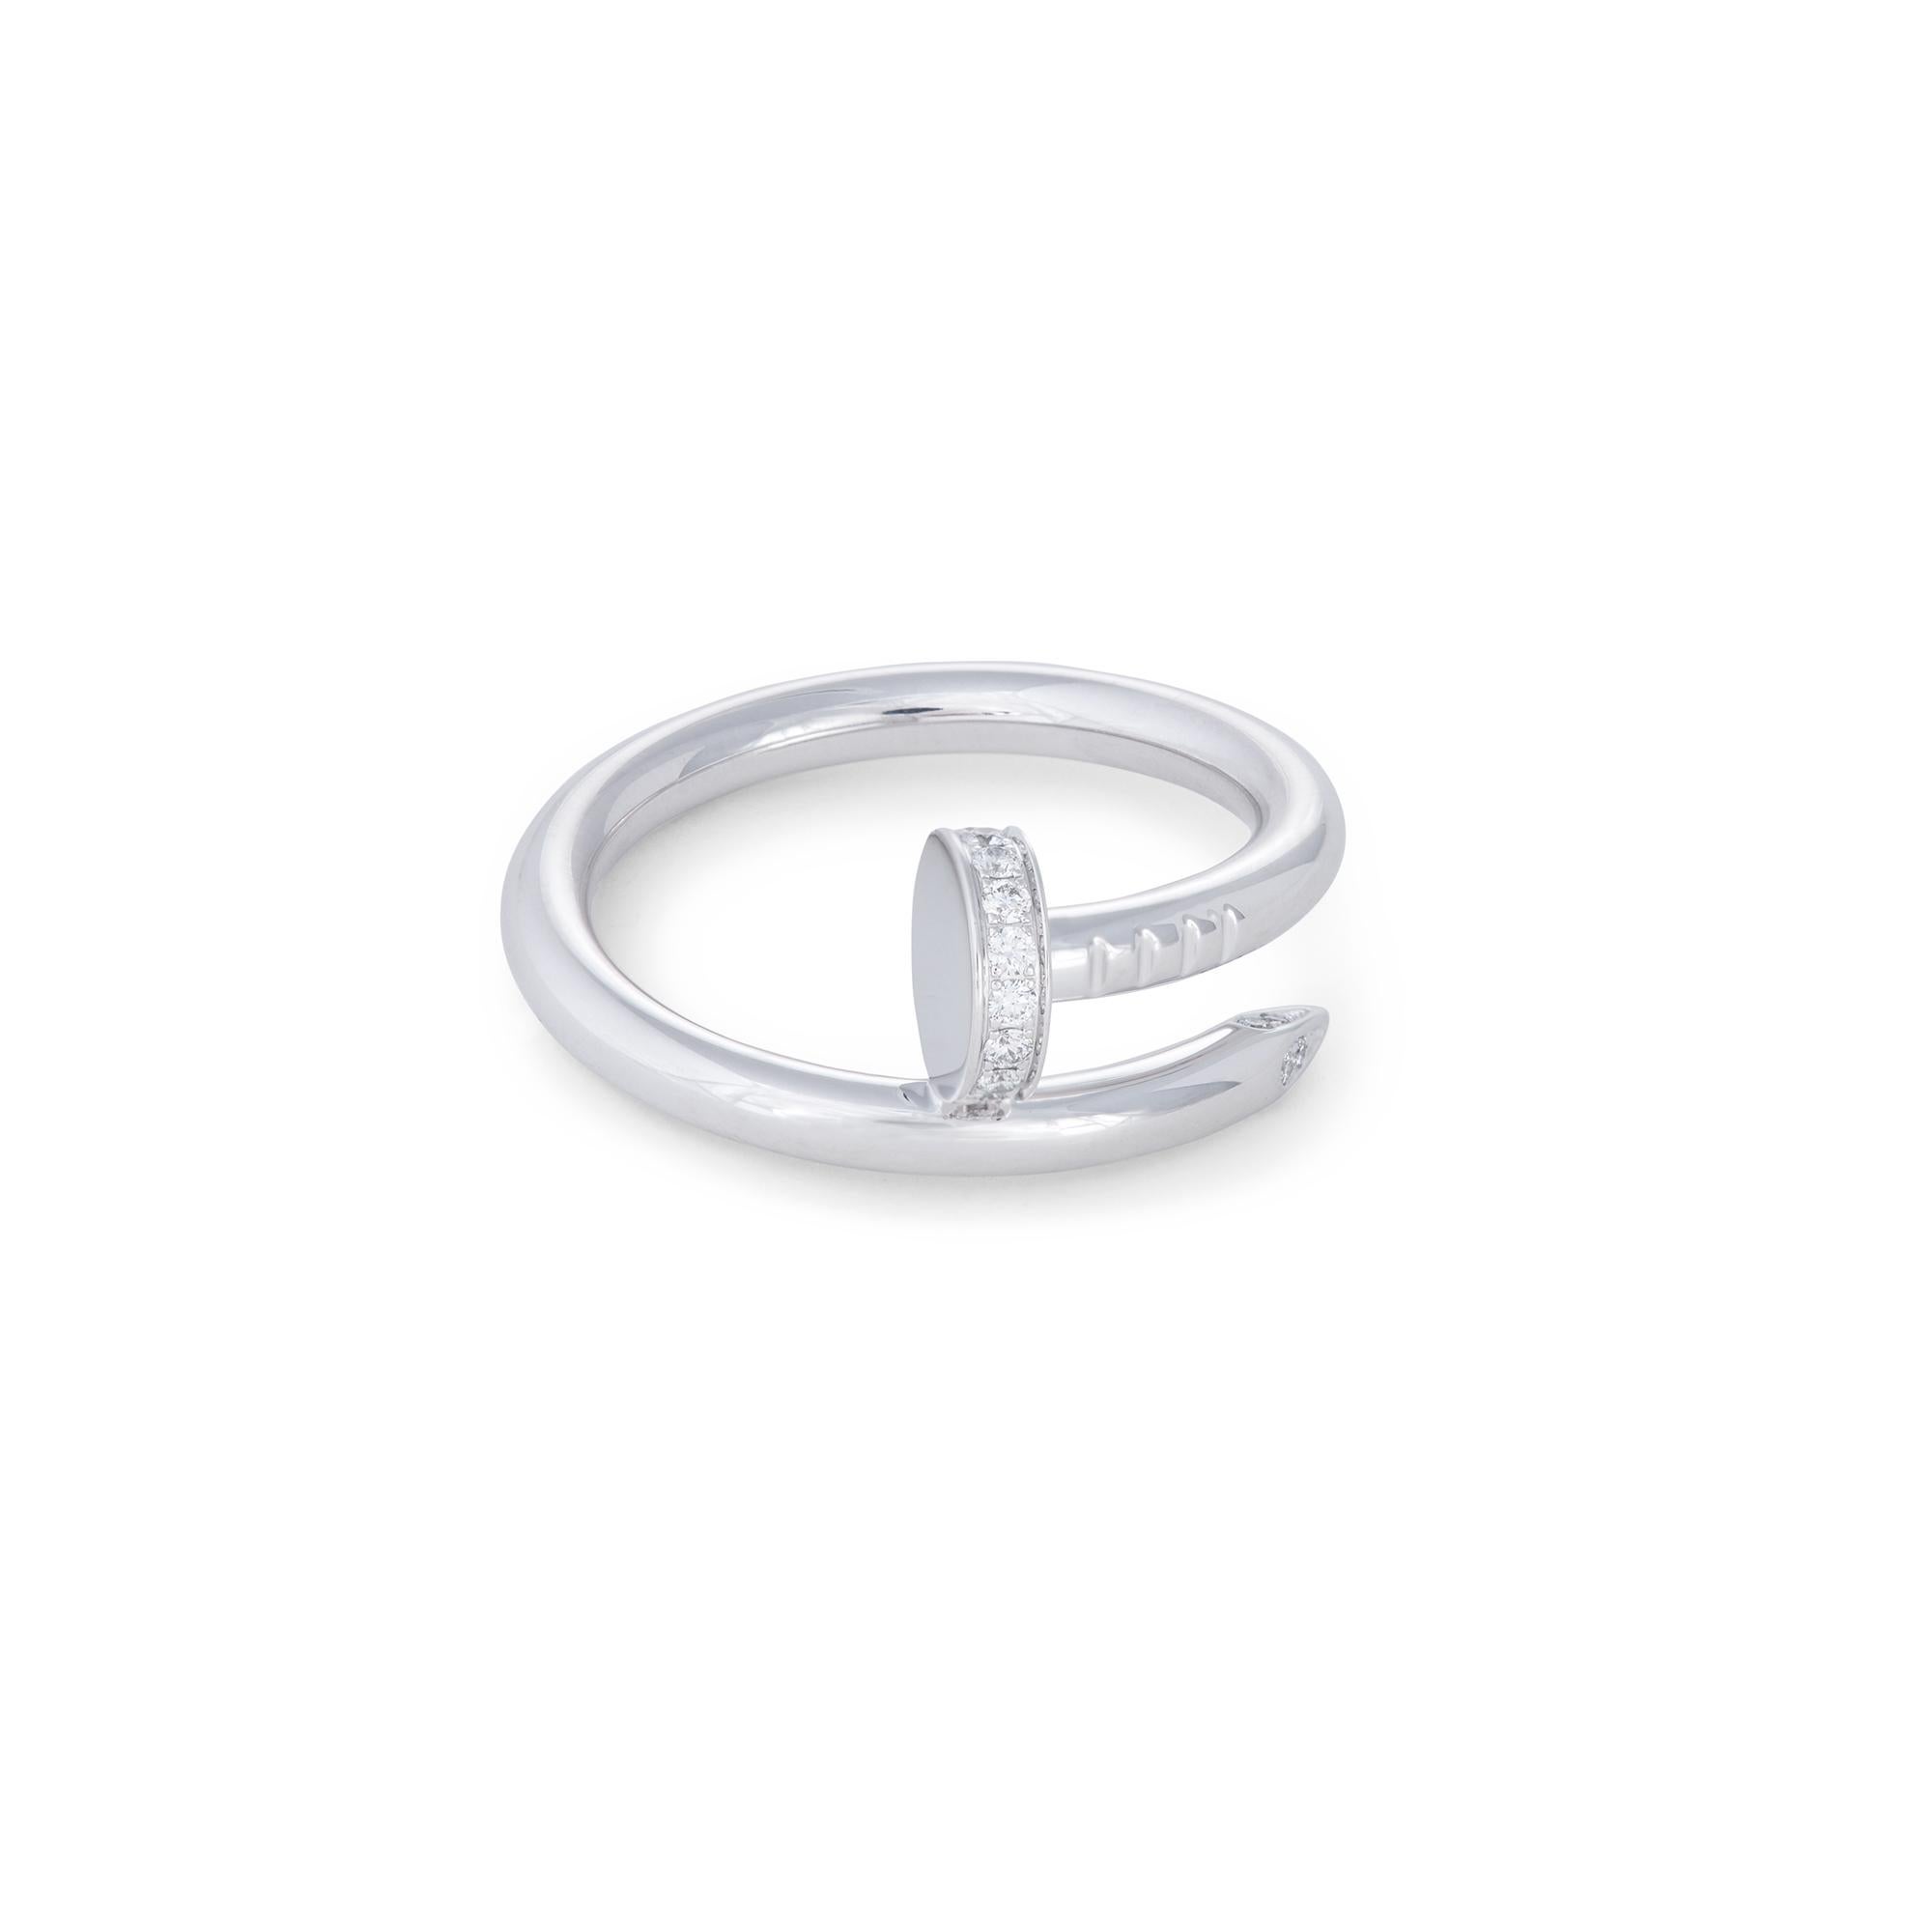 Authentic Cartier 'Juste un Clou' ring crafted in 18 karat white gold. The ring is set with approx. 0.13 carats of round brilliant cut diamonds (E-F color, VS clarity). Signed Cartier, 750. with serial number and hallmark. Size 55 (US 7 1/4).